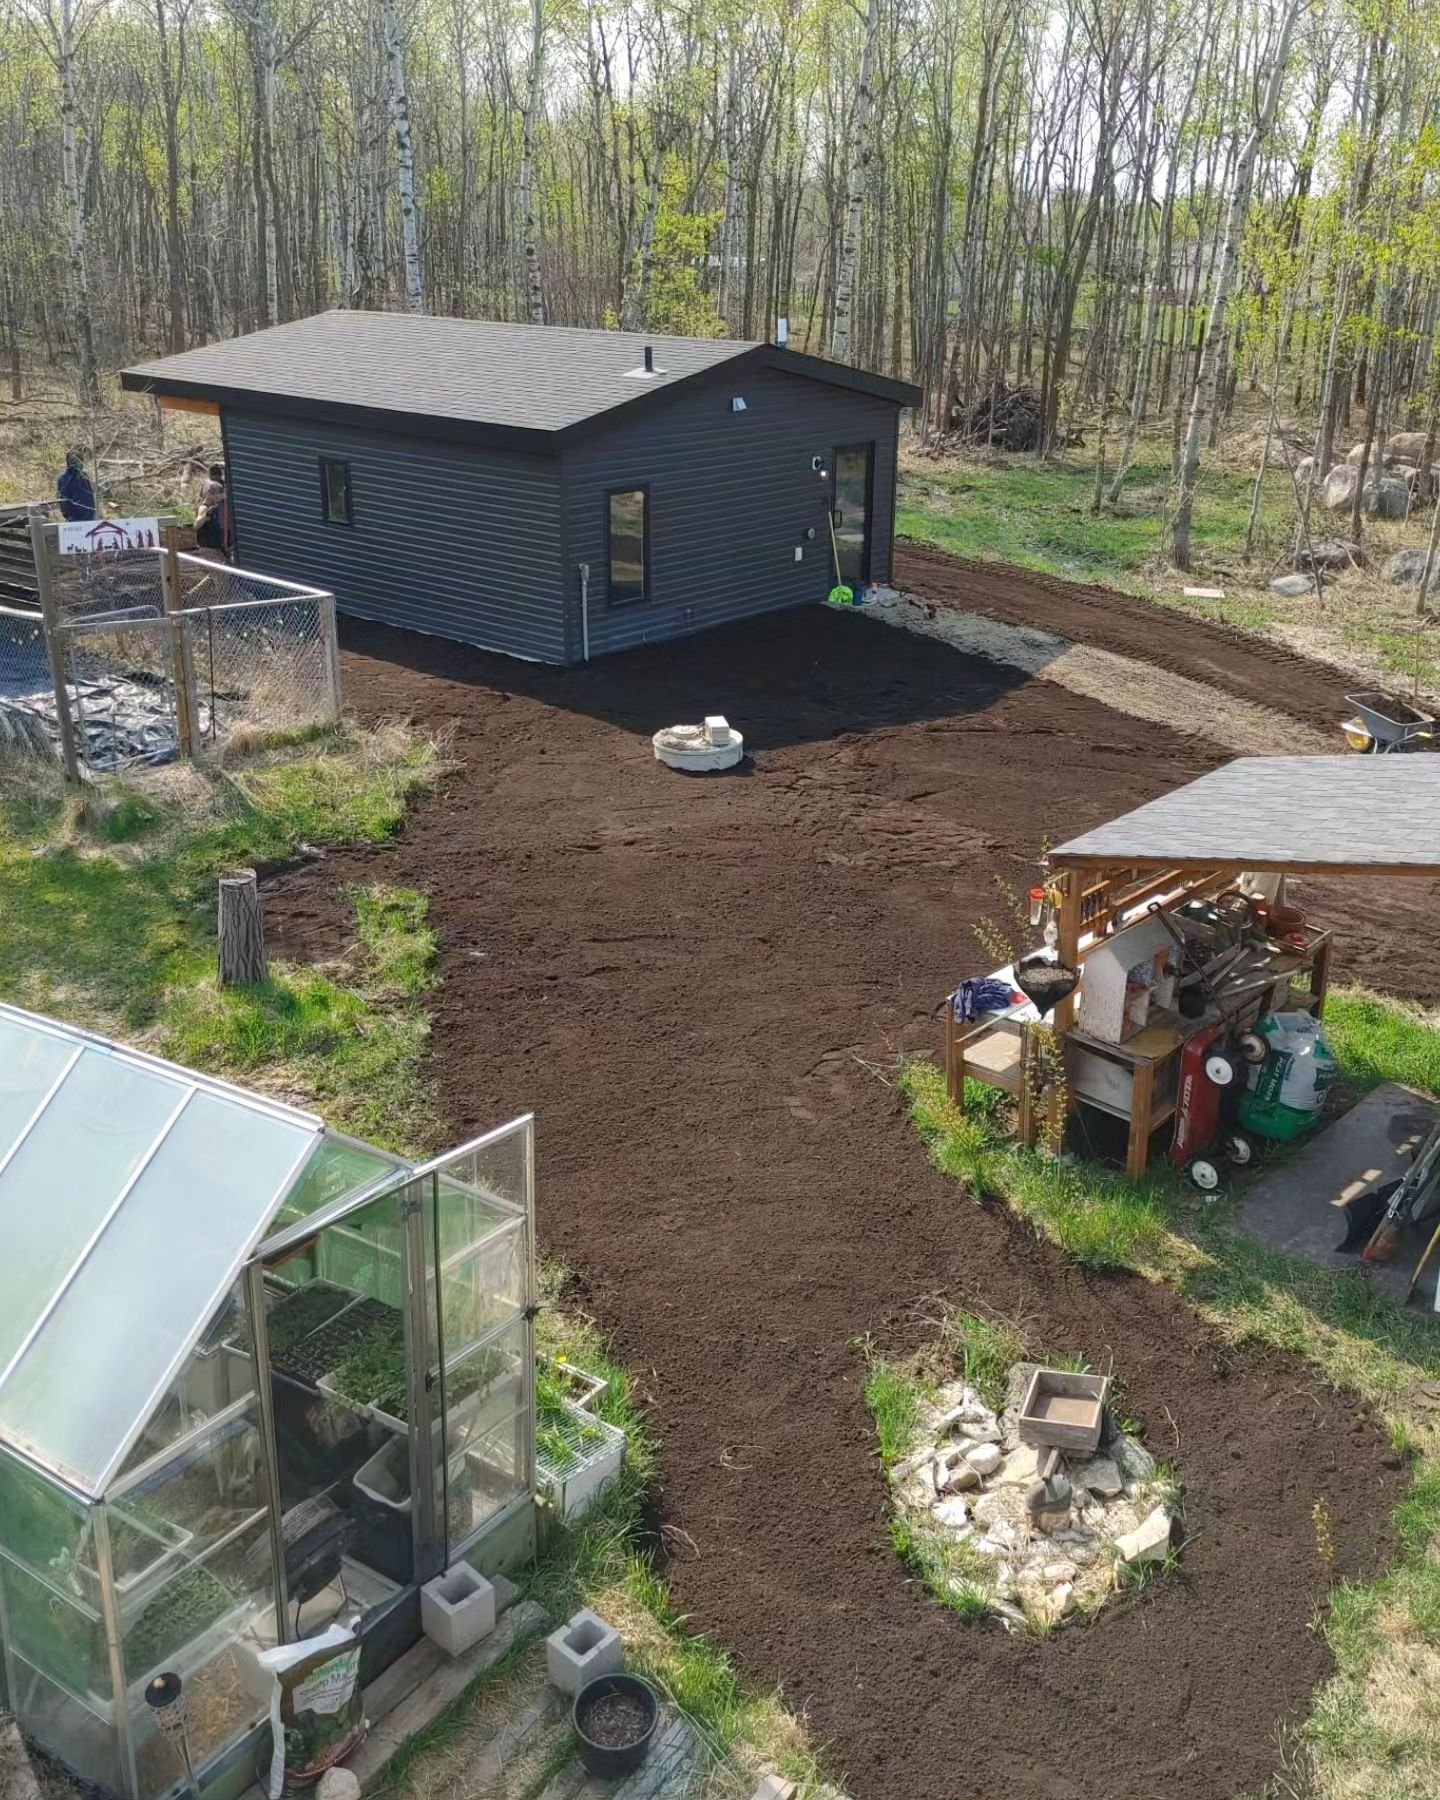 Studio-in-the-woods got some much needed work! The last major expense. 😅 Waiting to green up and welcome summer 2024 TINTA Experience guests! Local landscape company worked on grading and seeding around the studio yesterday morning. Perfect timing a